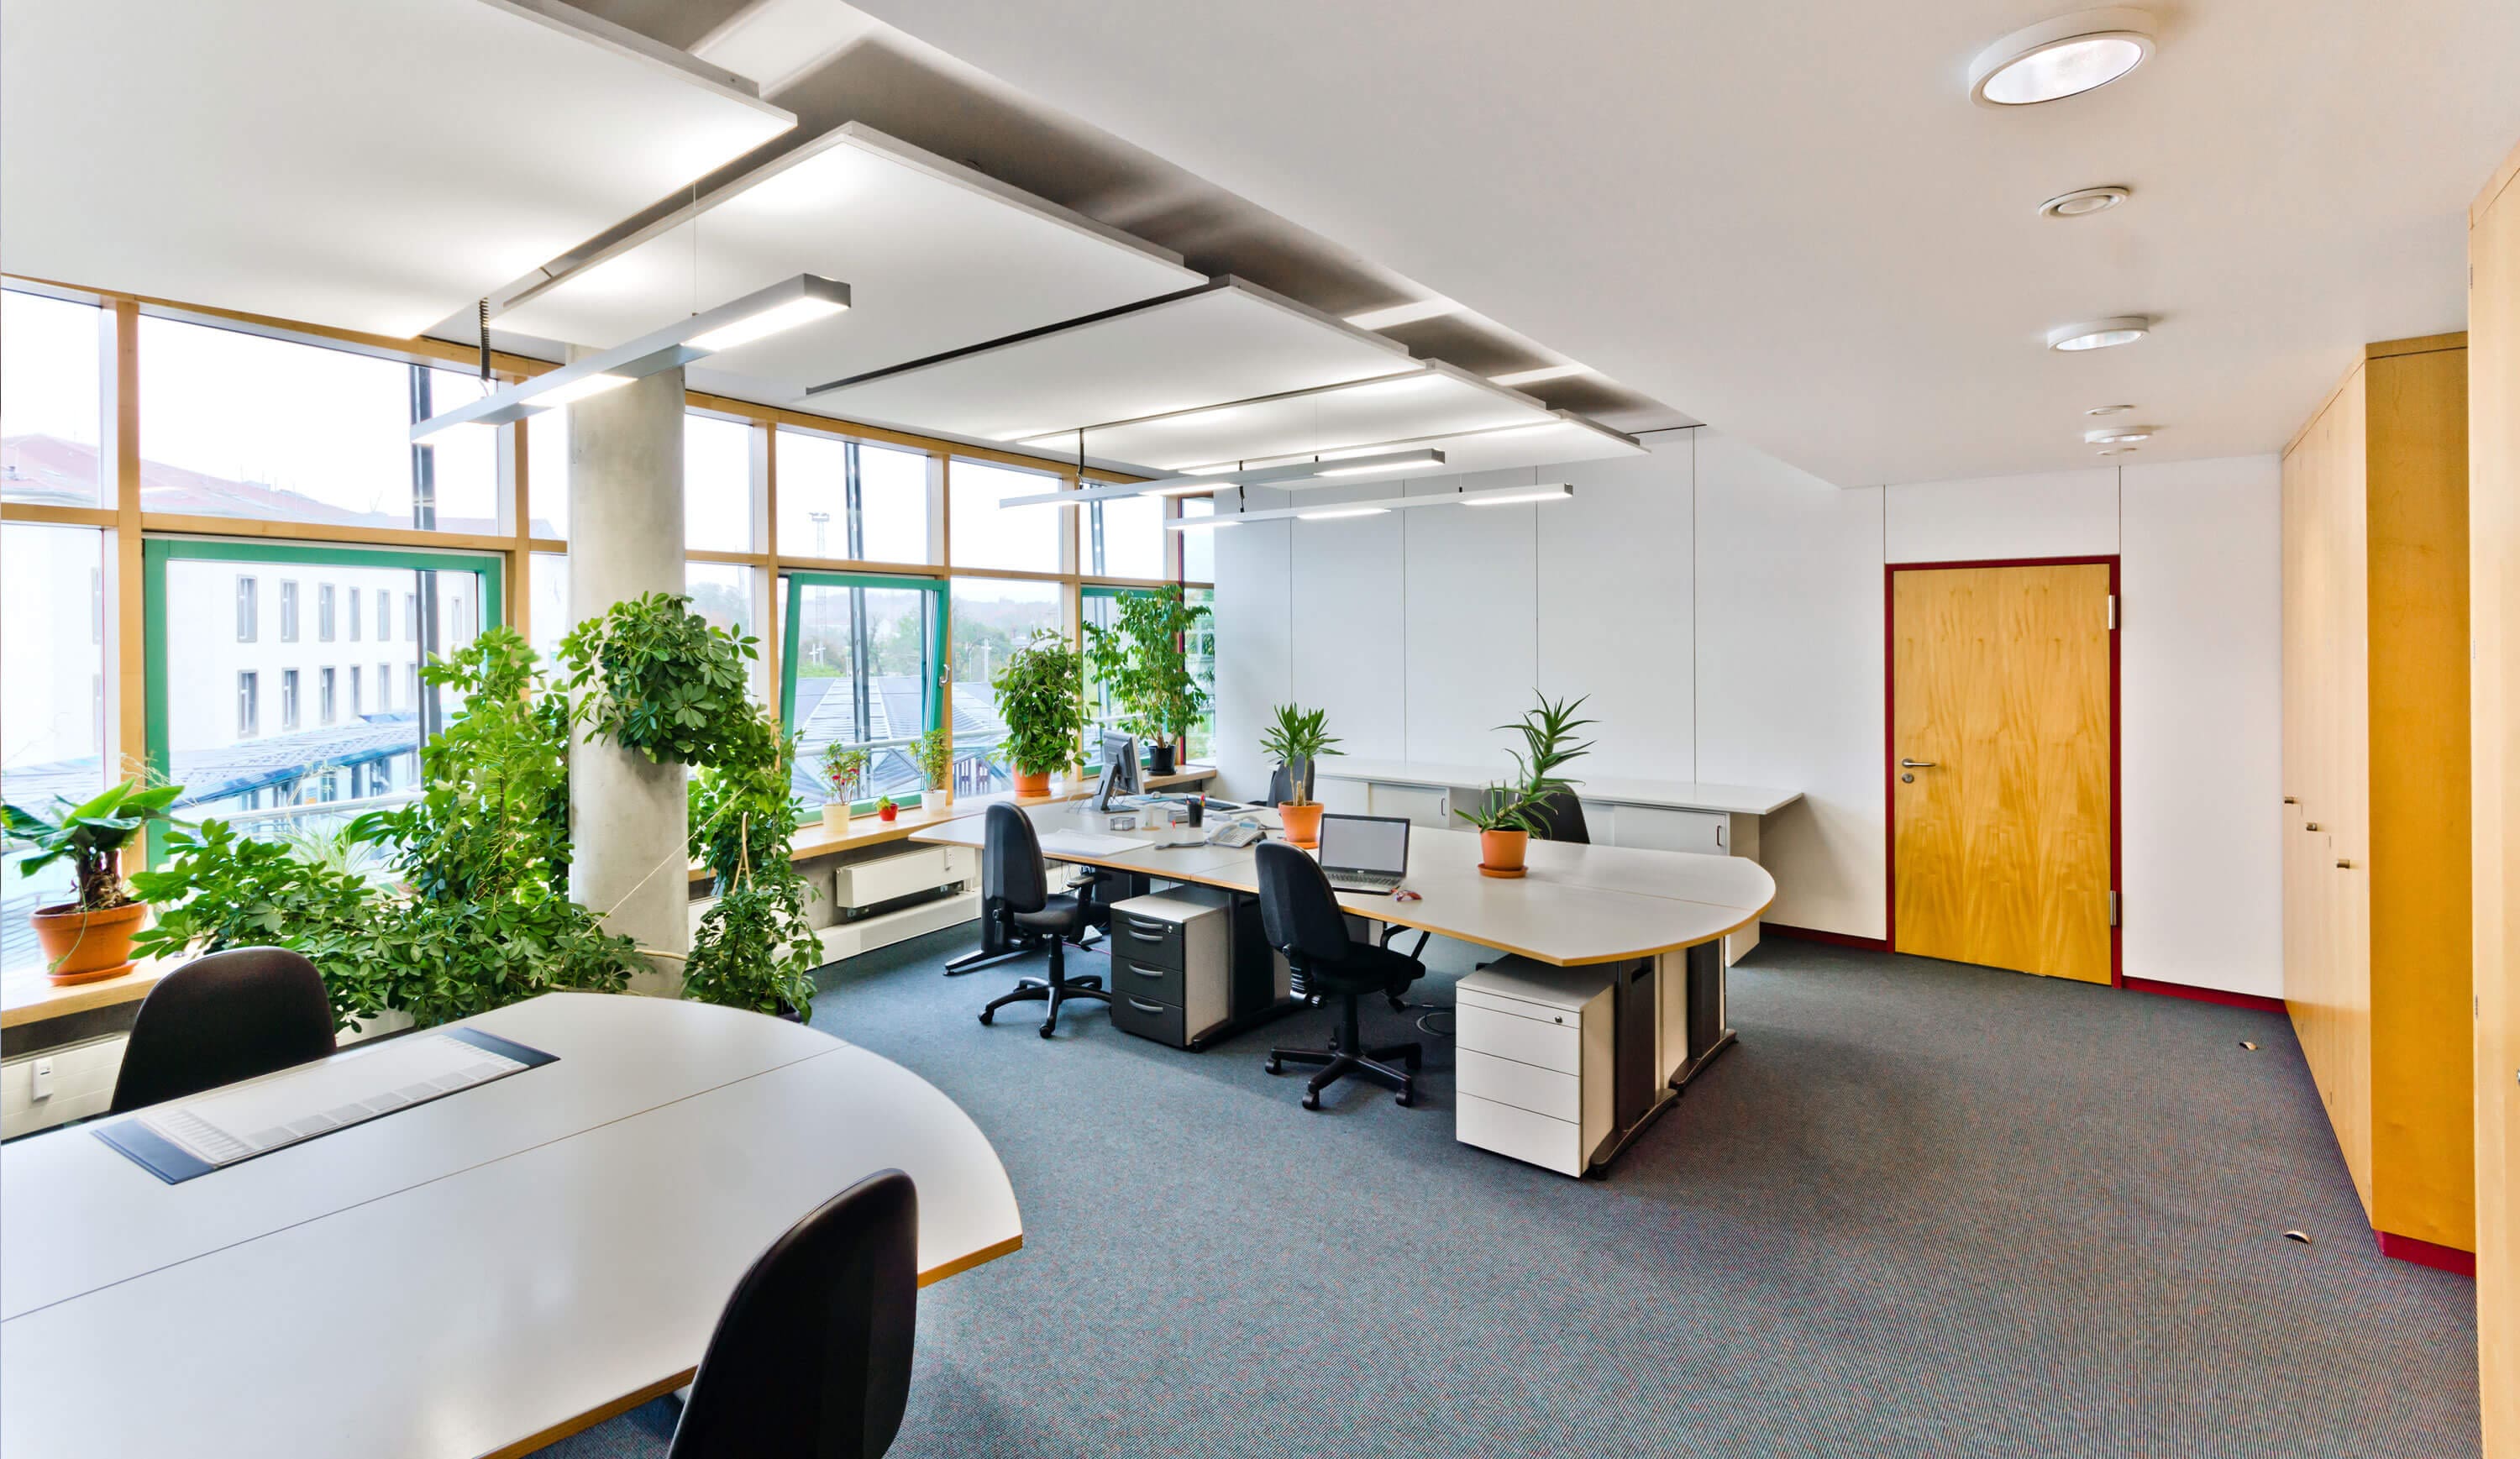 Office Design Trends to Watch for 2020 – Interior Design ...